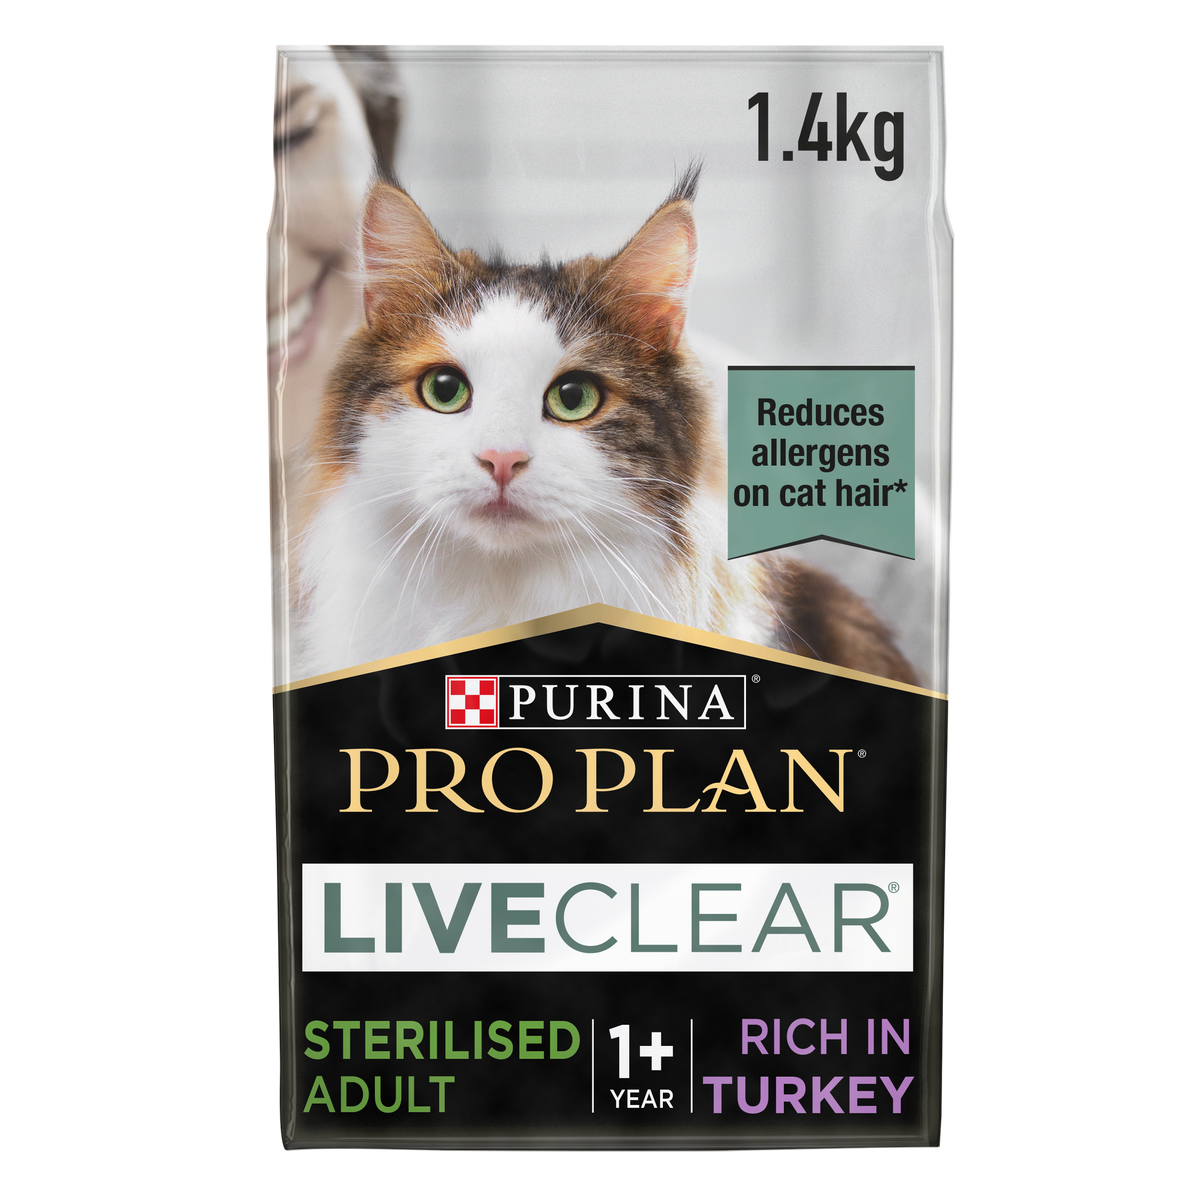 PURINA® PRO PLAN Liveclear Sterilised